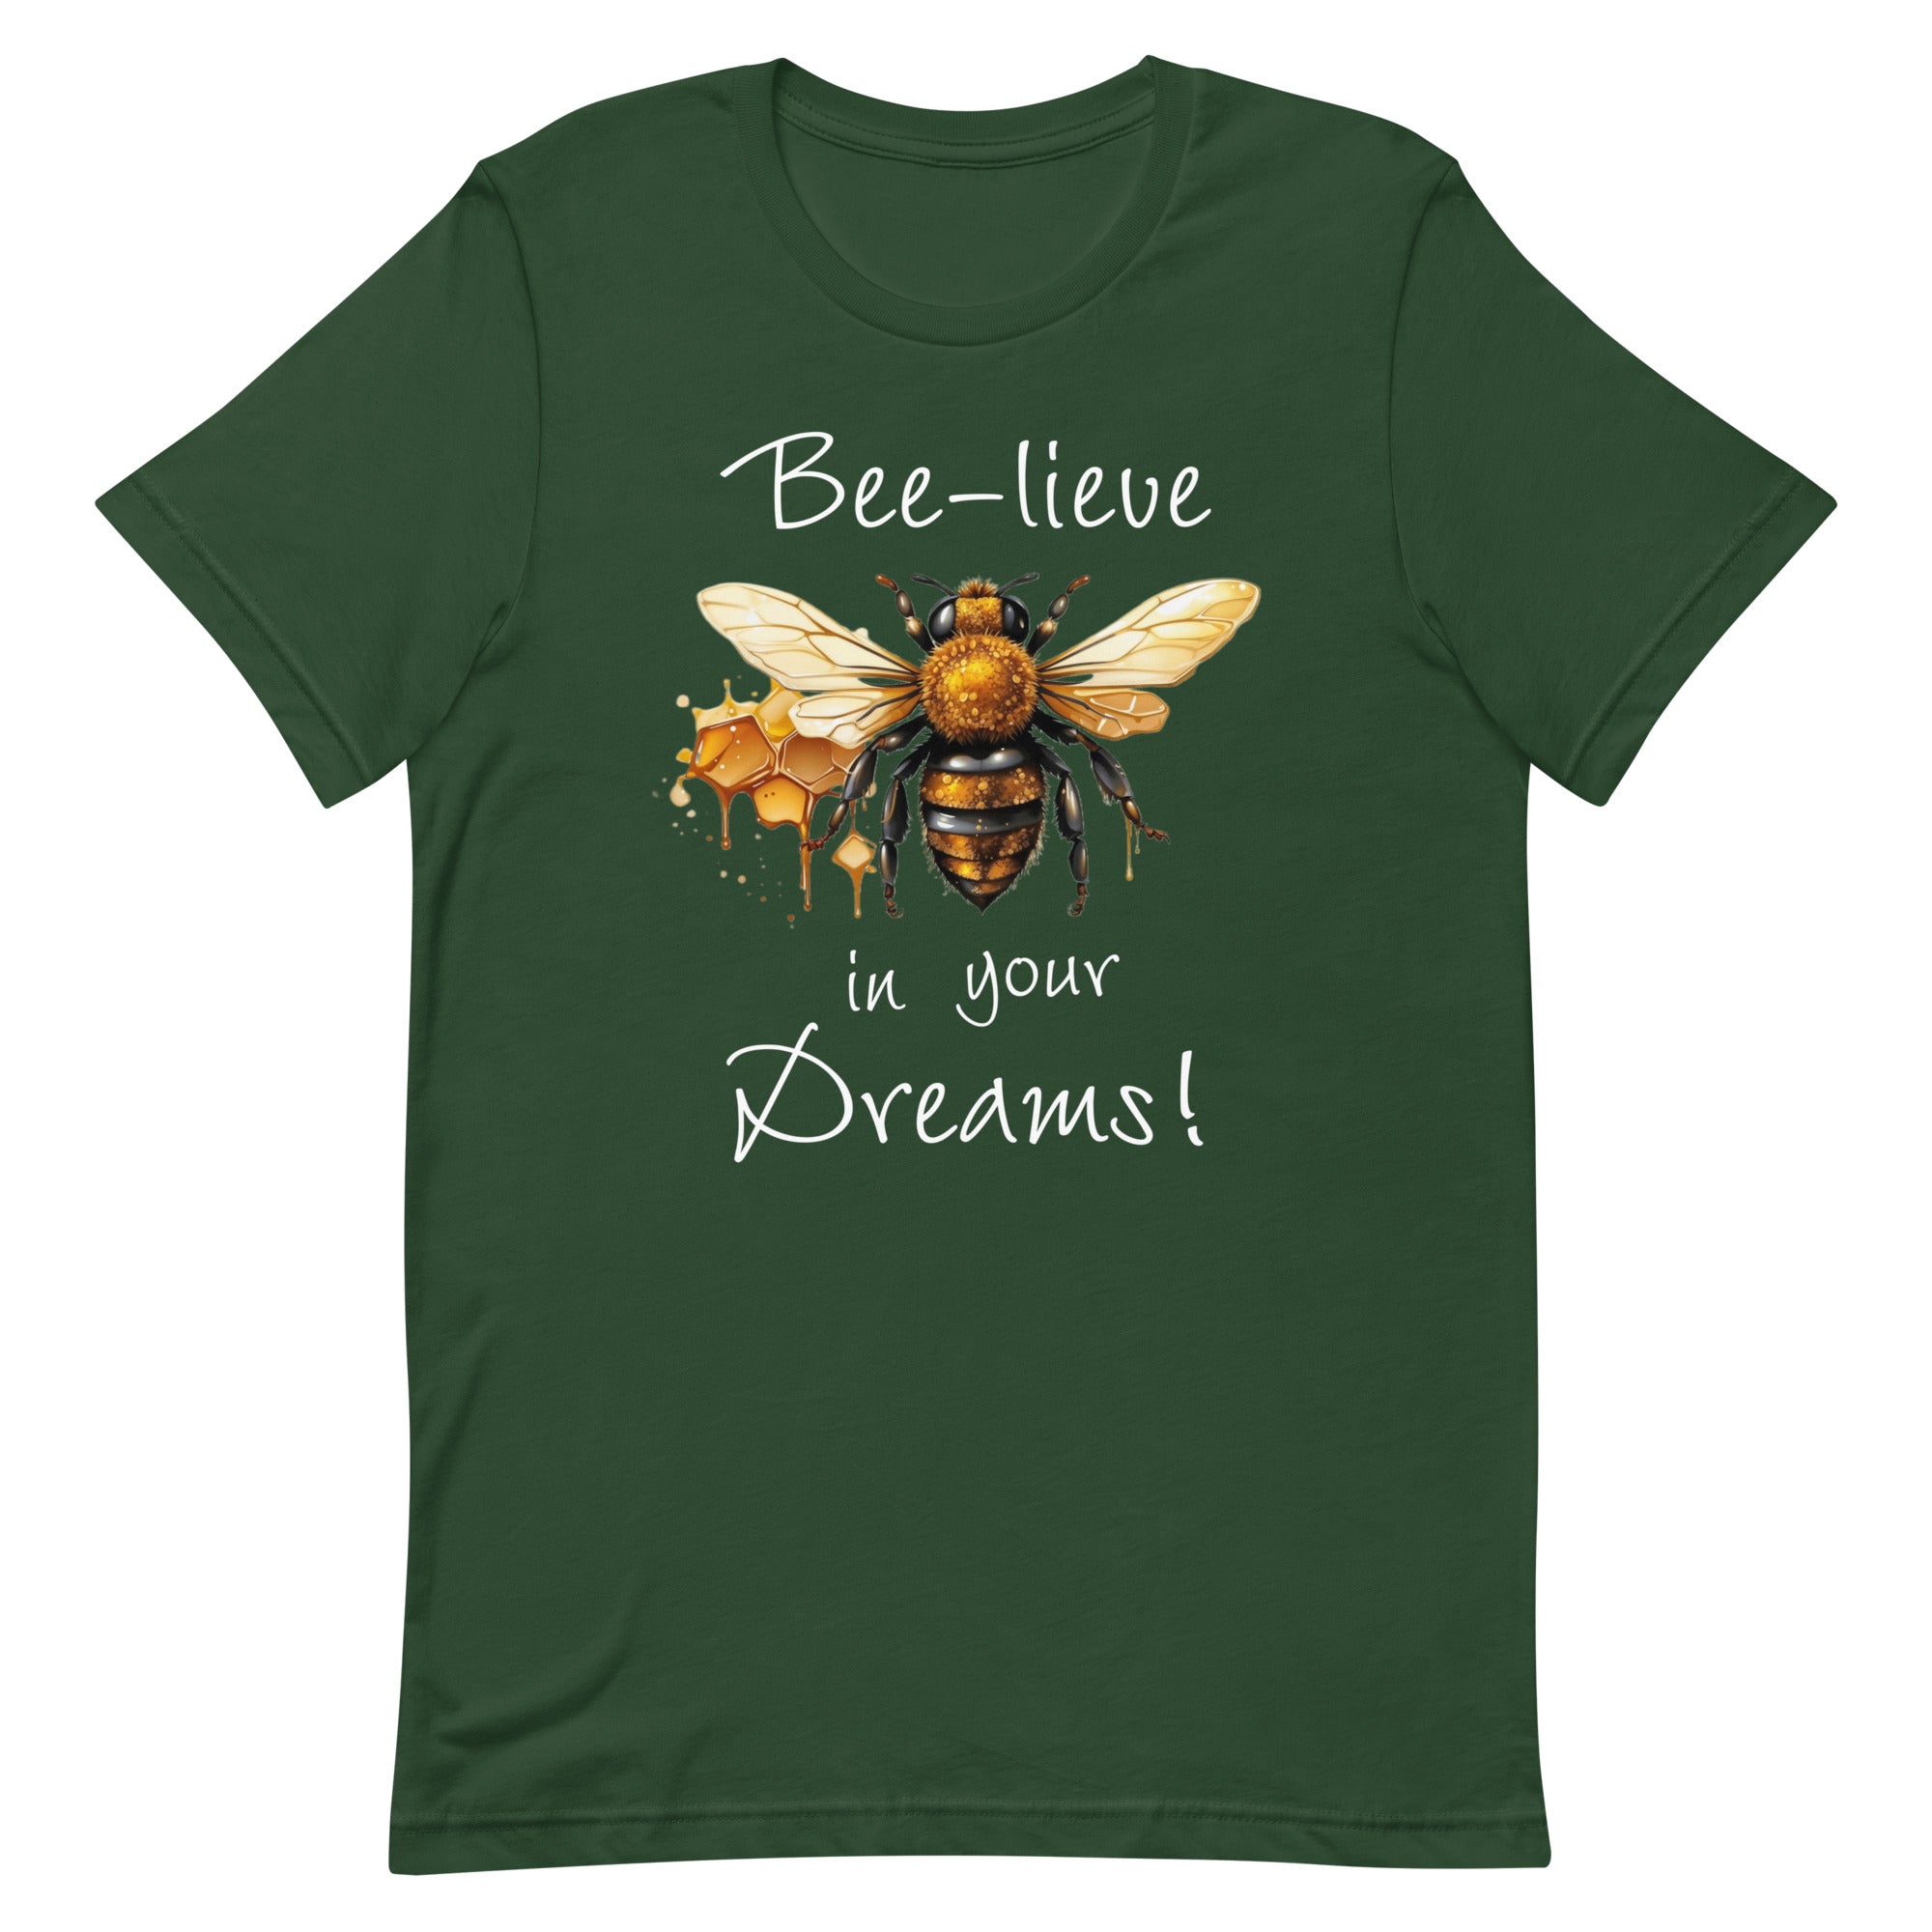 Bee-lieve in Your Dreams T-Shirt, Gift for Bee Lovers Forest L M XL S DenBox